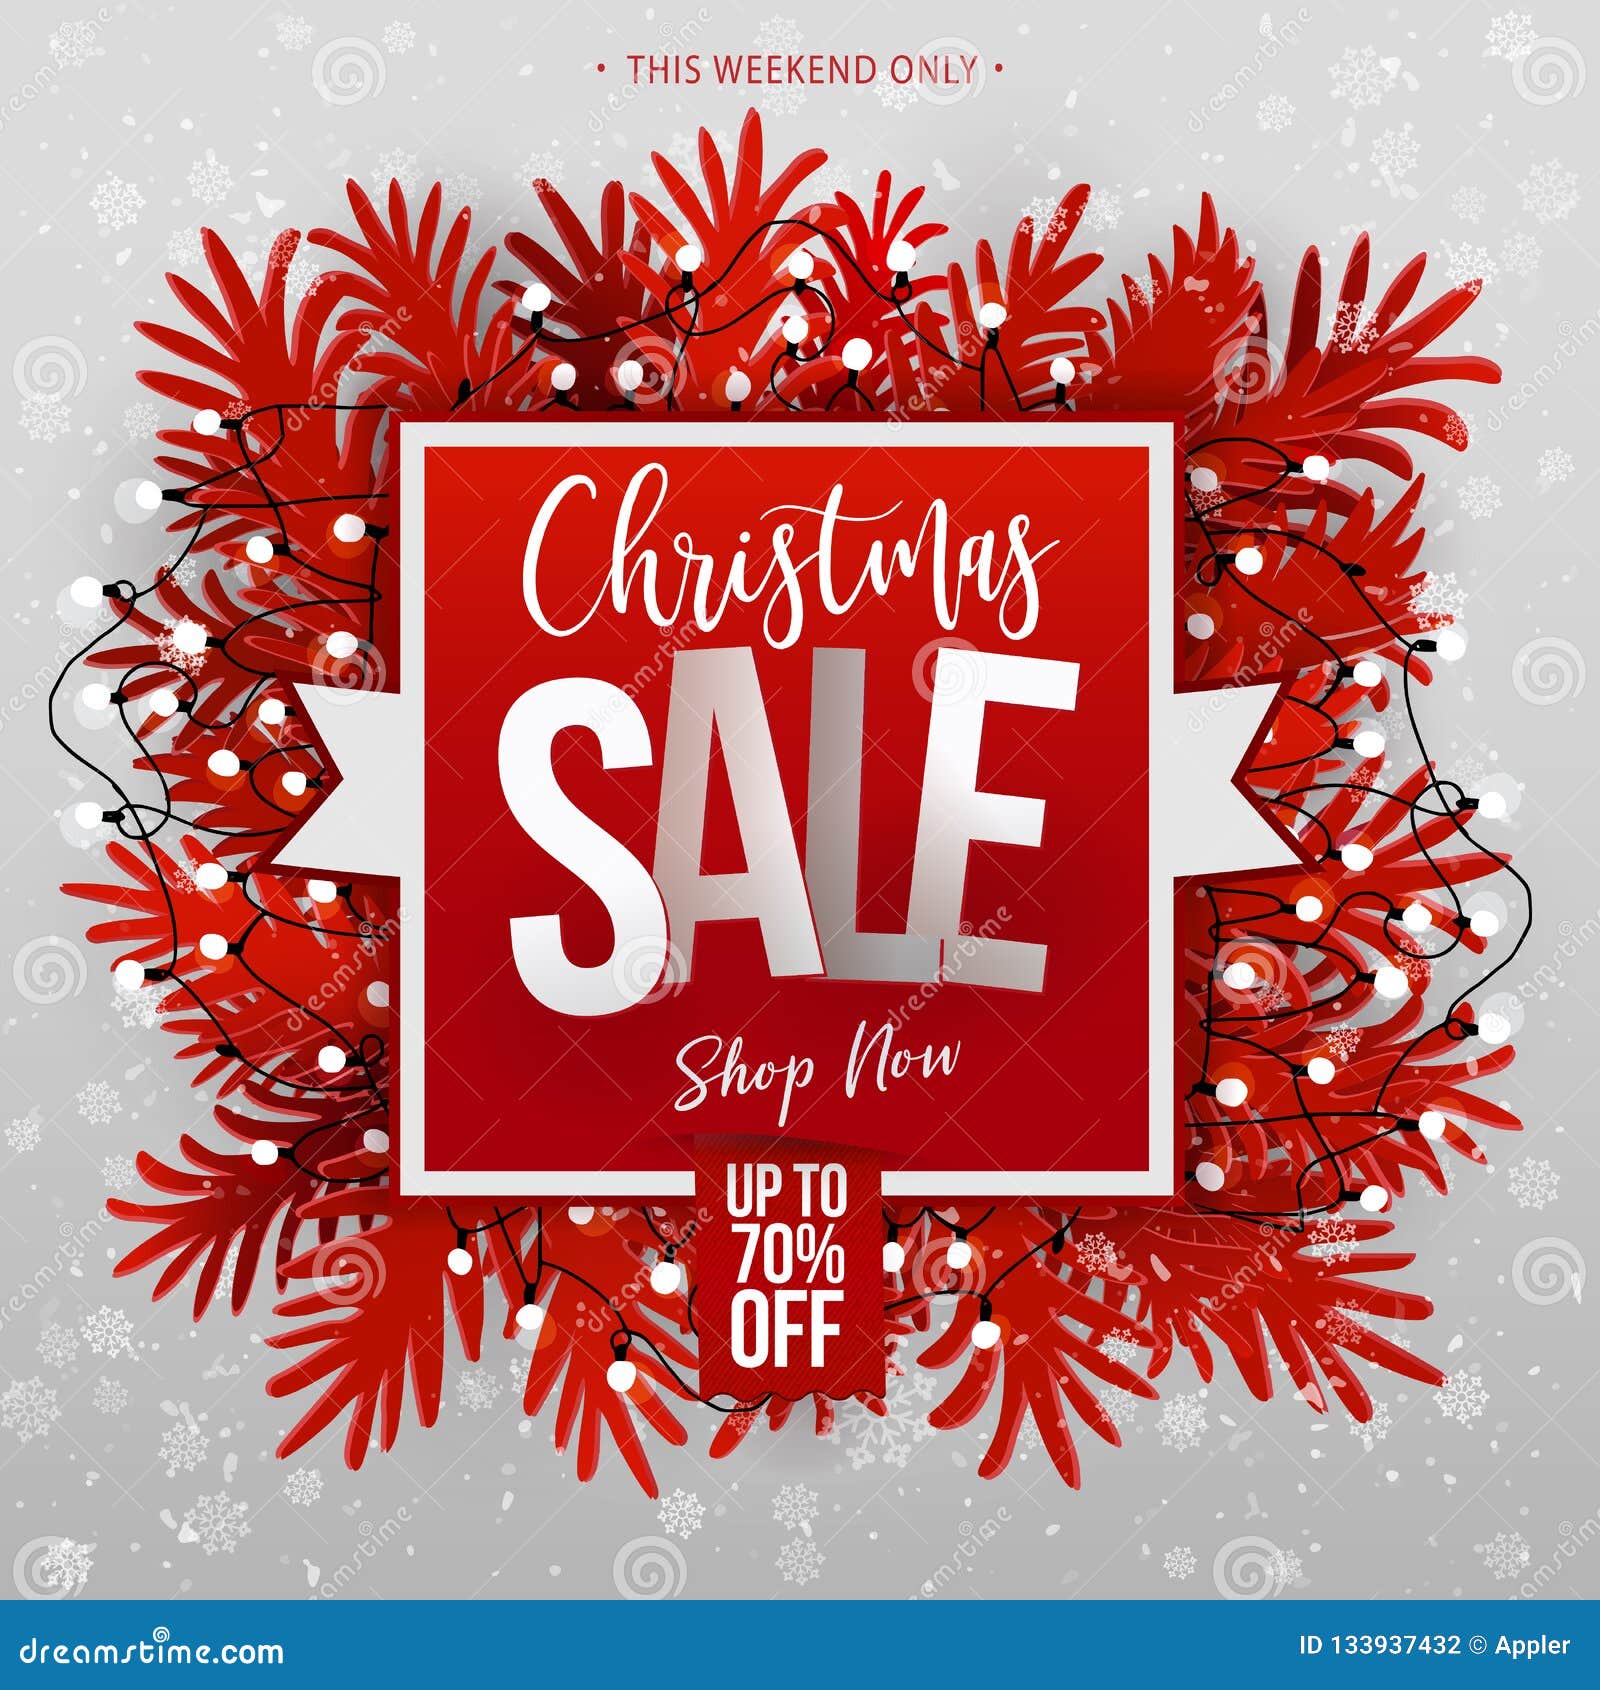 https://thumbs.dreamstime.com/z/christmas-clearance-sale-banner-christmas-clearance-sale-banner-paper-art-craft-cut-out-fir-tree-branches-around-red-banner-133937432.jpg